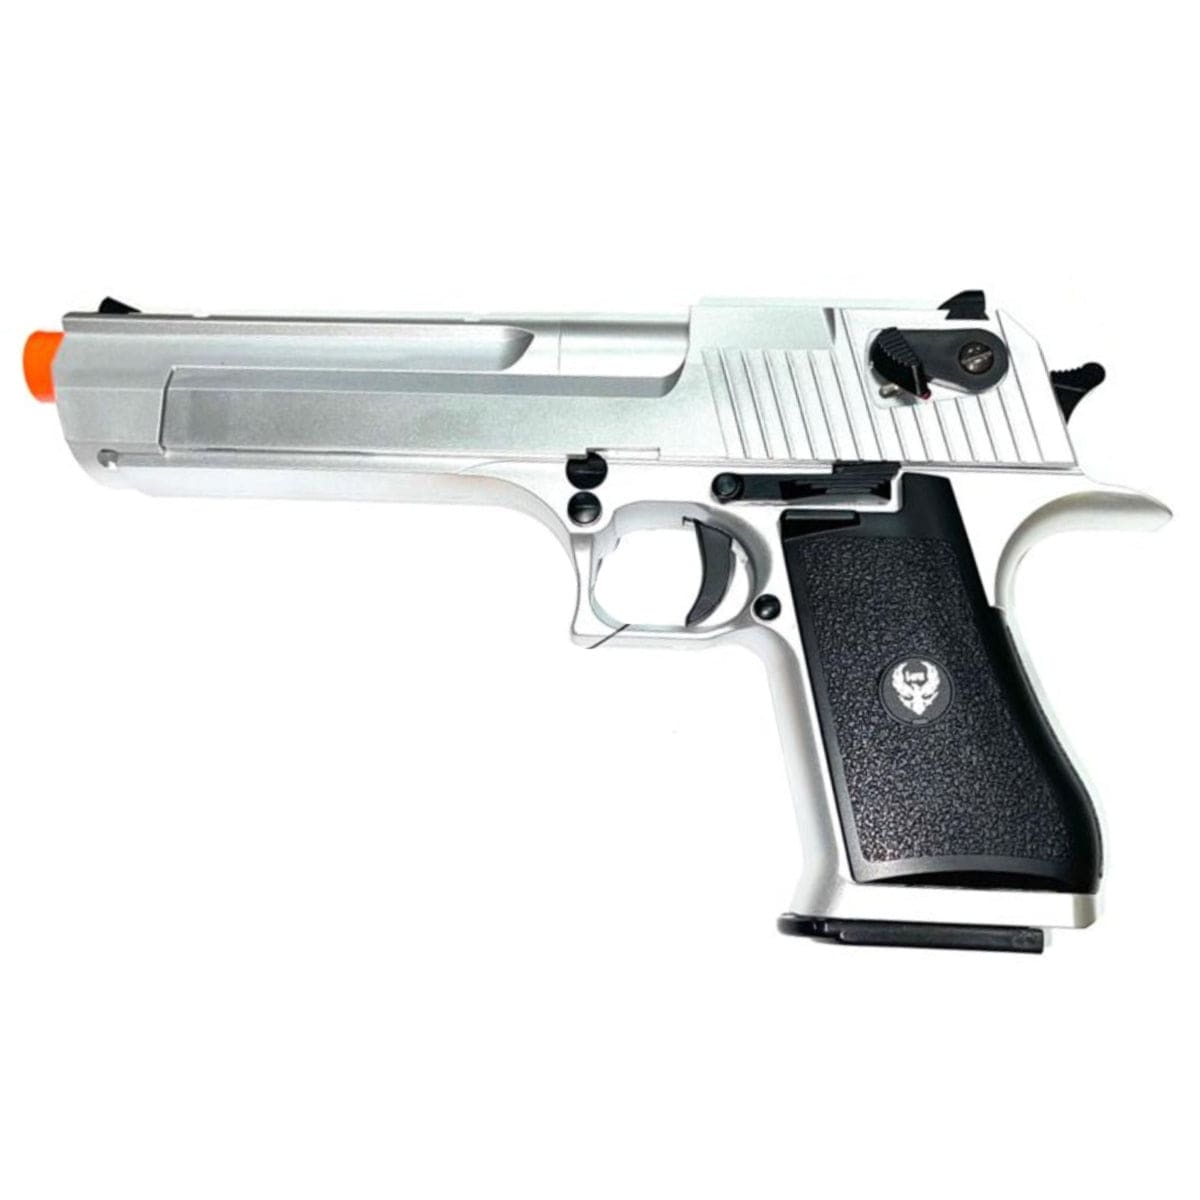 Airsportinggoods HFC HFC HG195 DESERT EAGLE GAS POWERED BLOWBACK AIRSOFT PISTOL SILVER